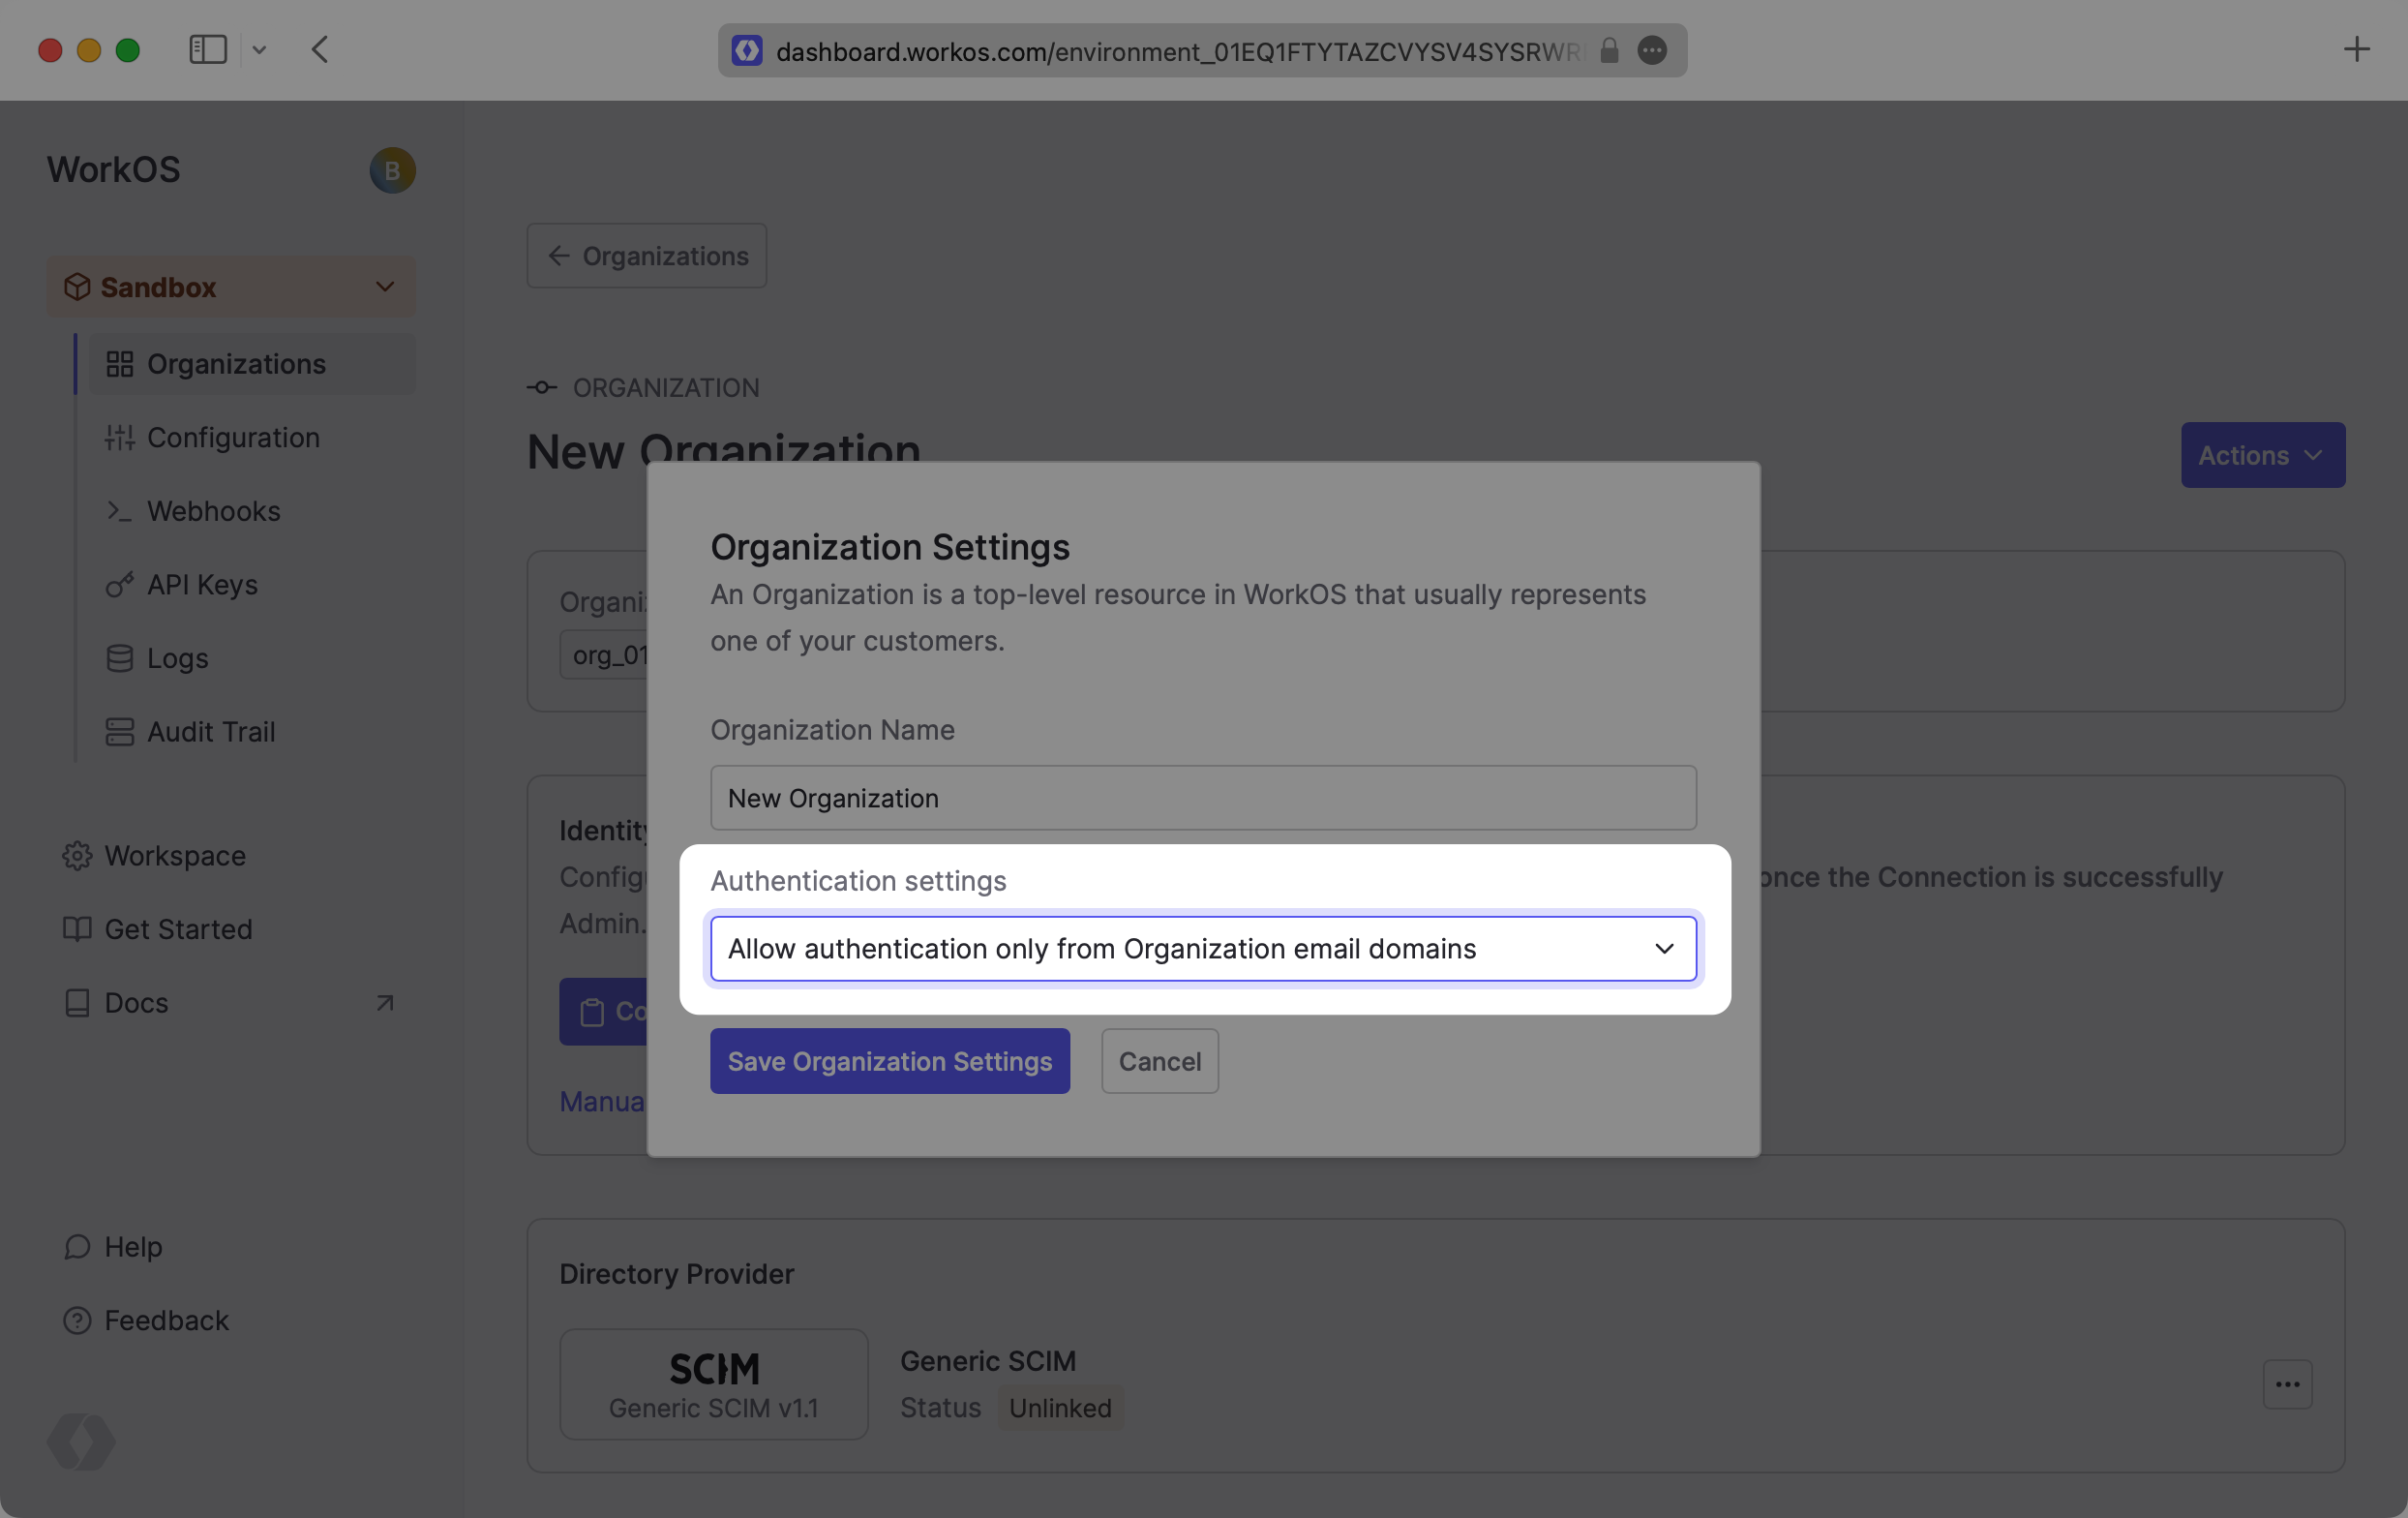 WorkOS Dashboard – Authentication Settings